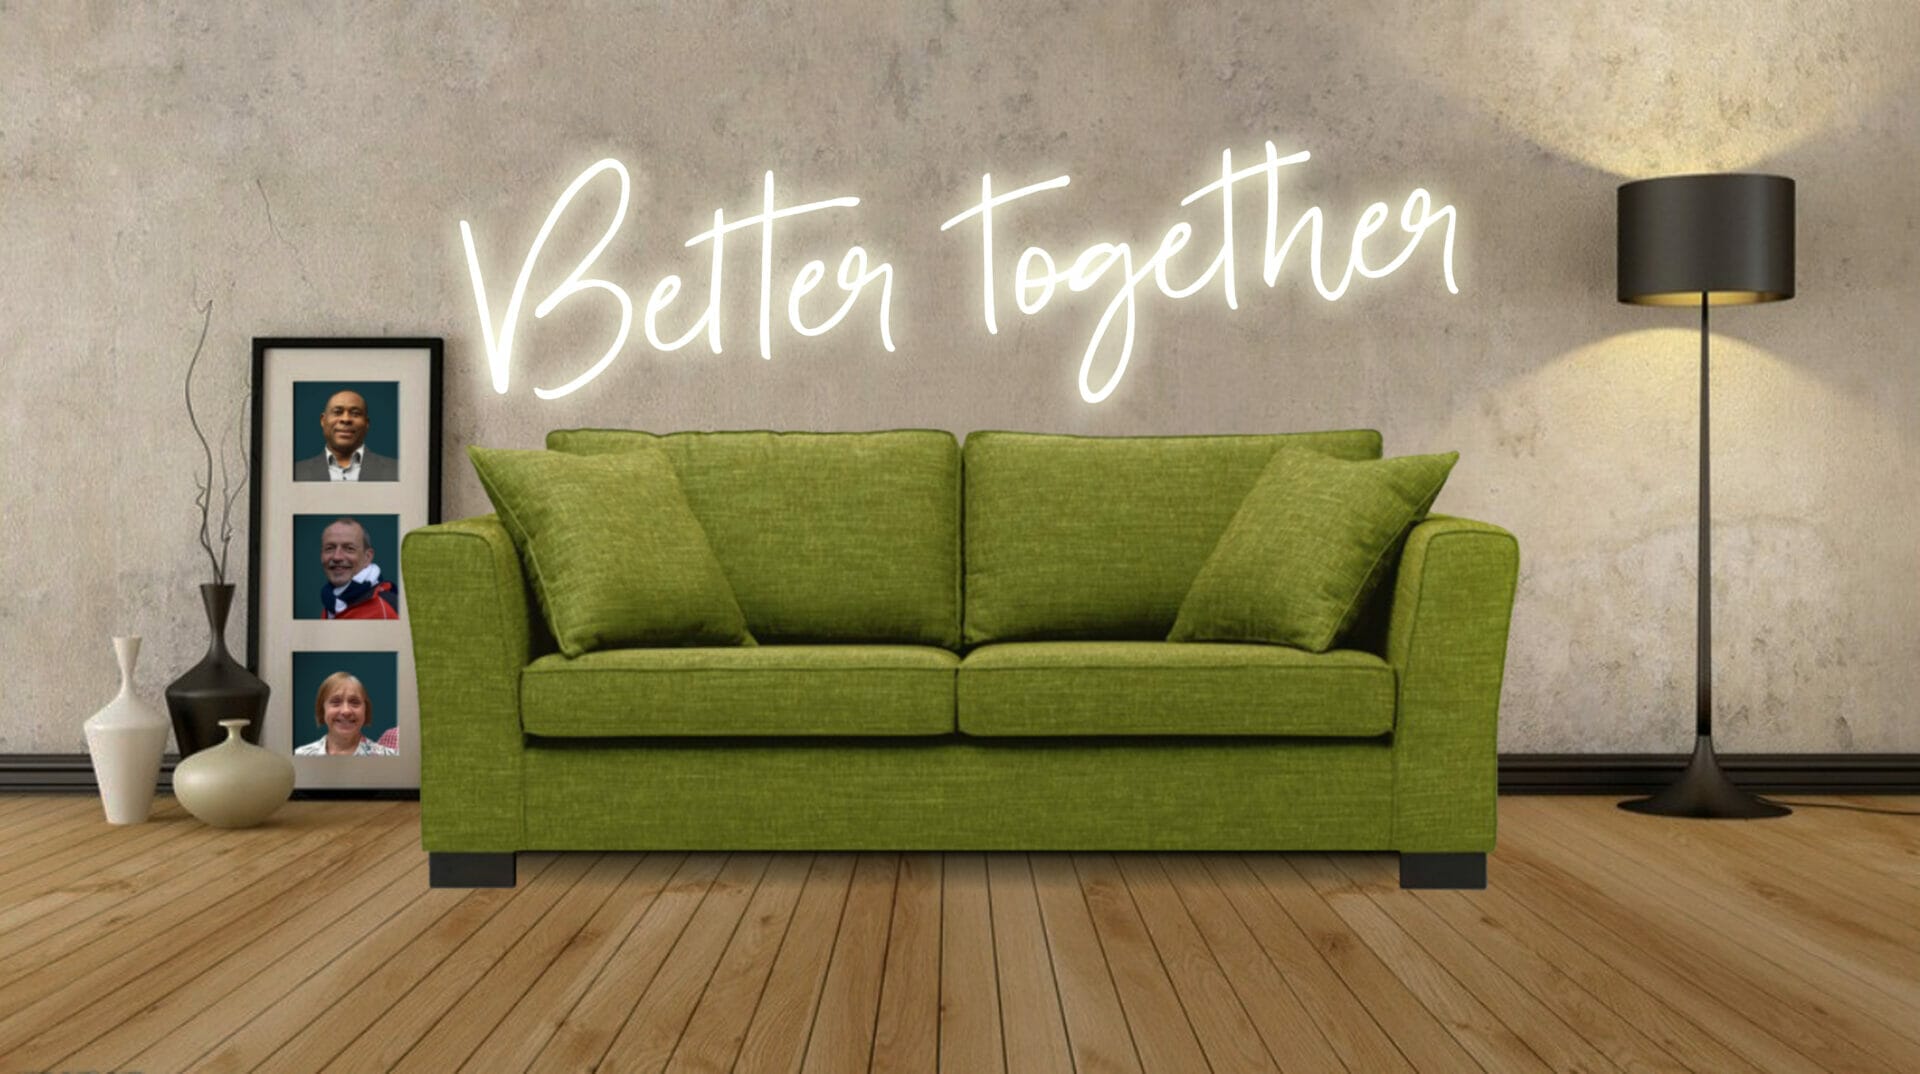 ‘Better Together’ – Caring for One-Another